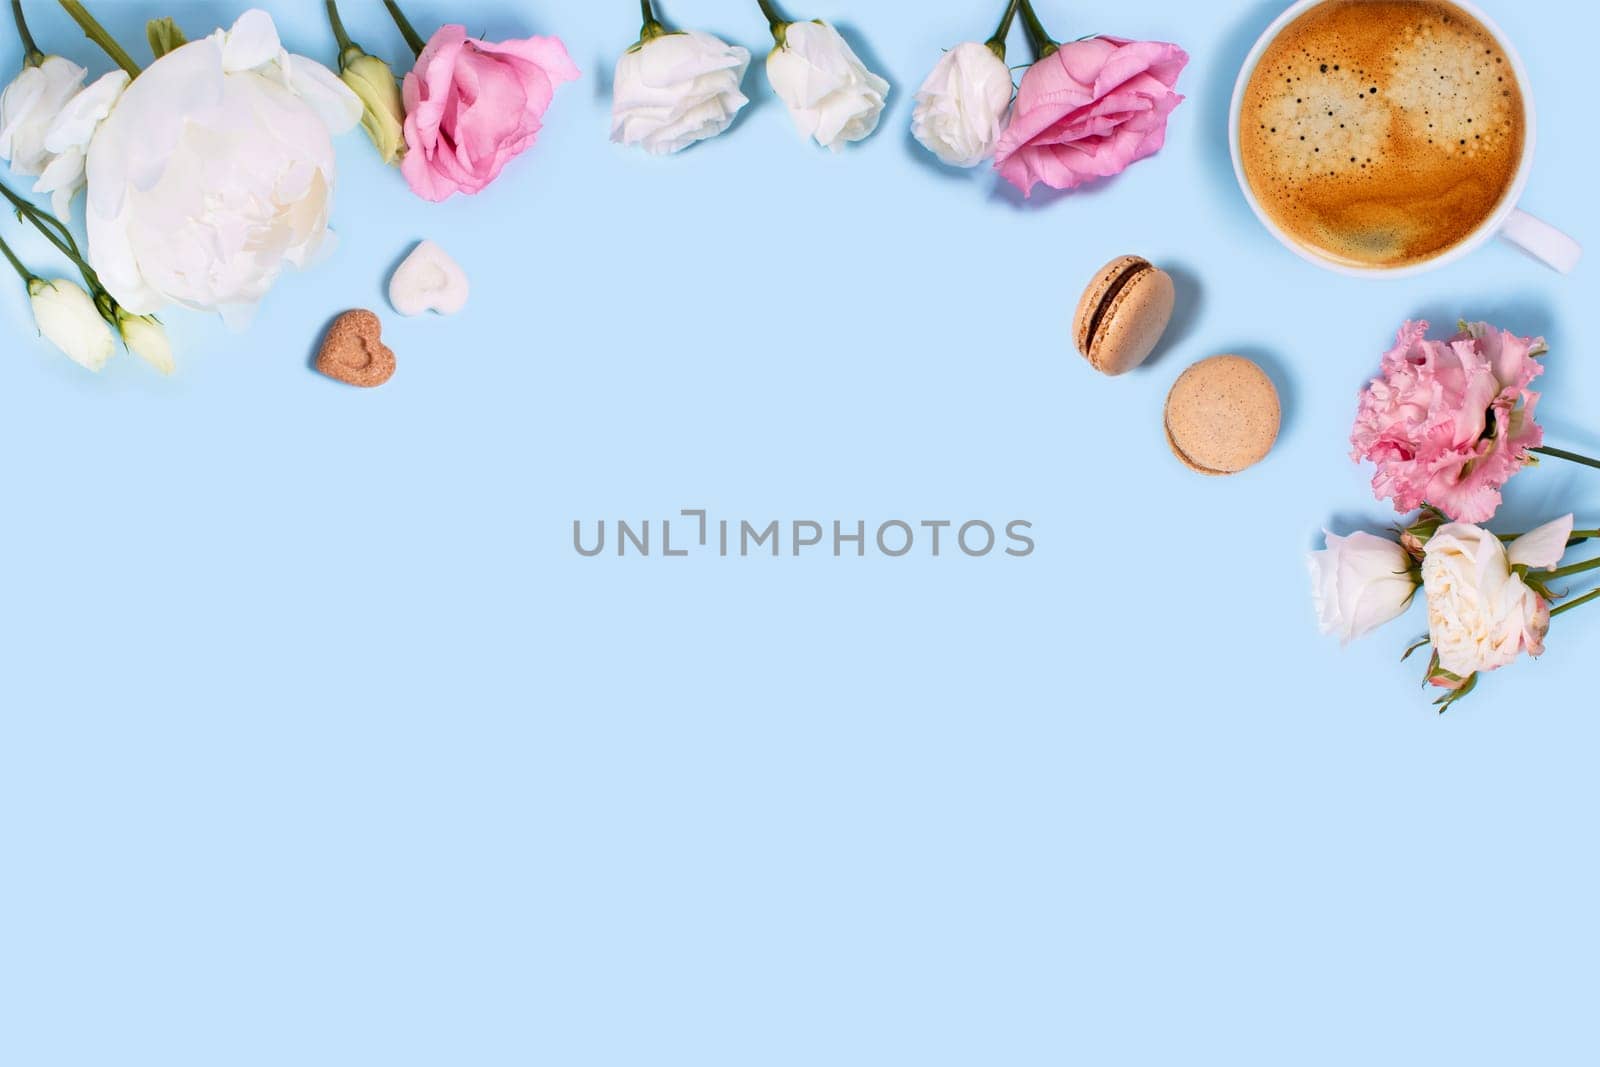 Blue background with cup of tasty coffee, macaroons, peonies and roses. Top view with space for your text.